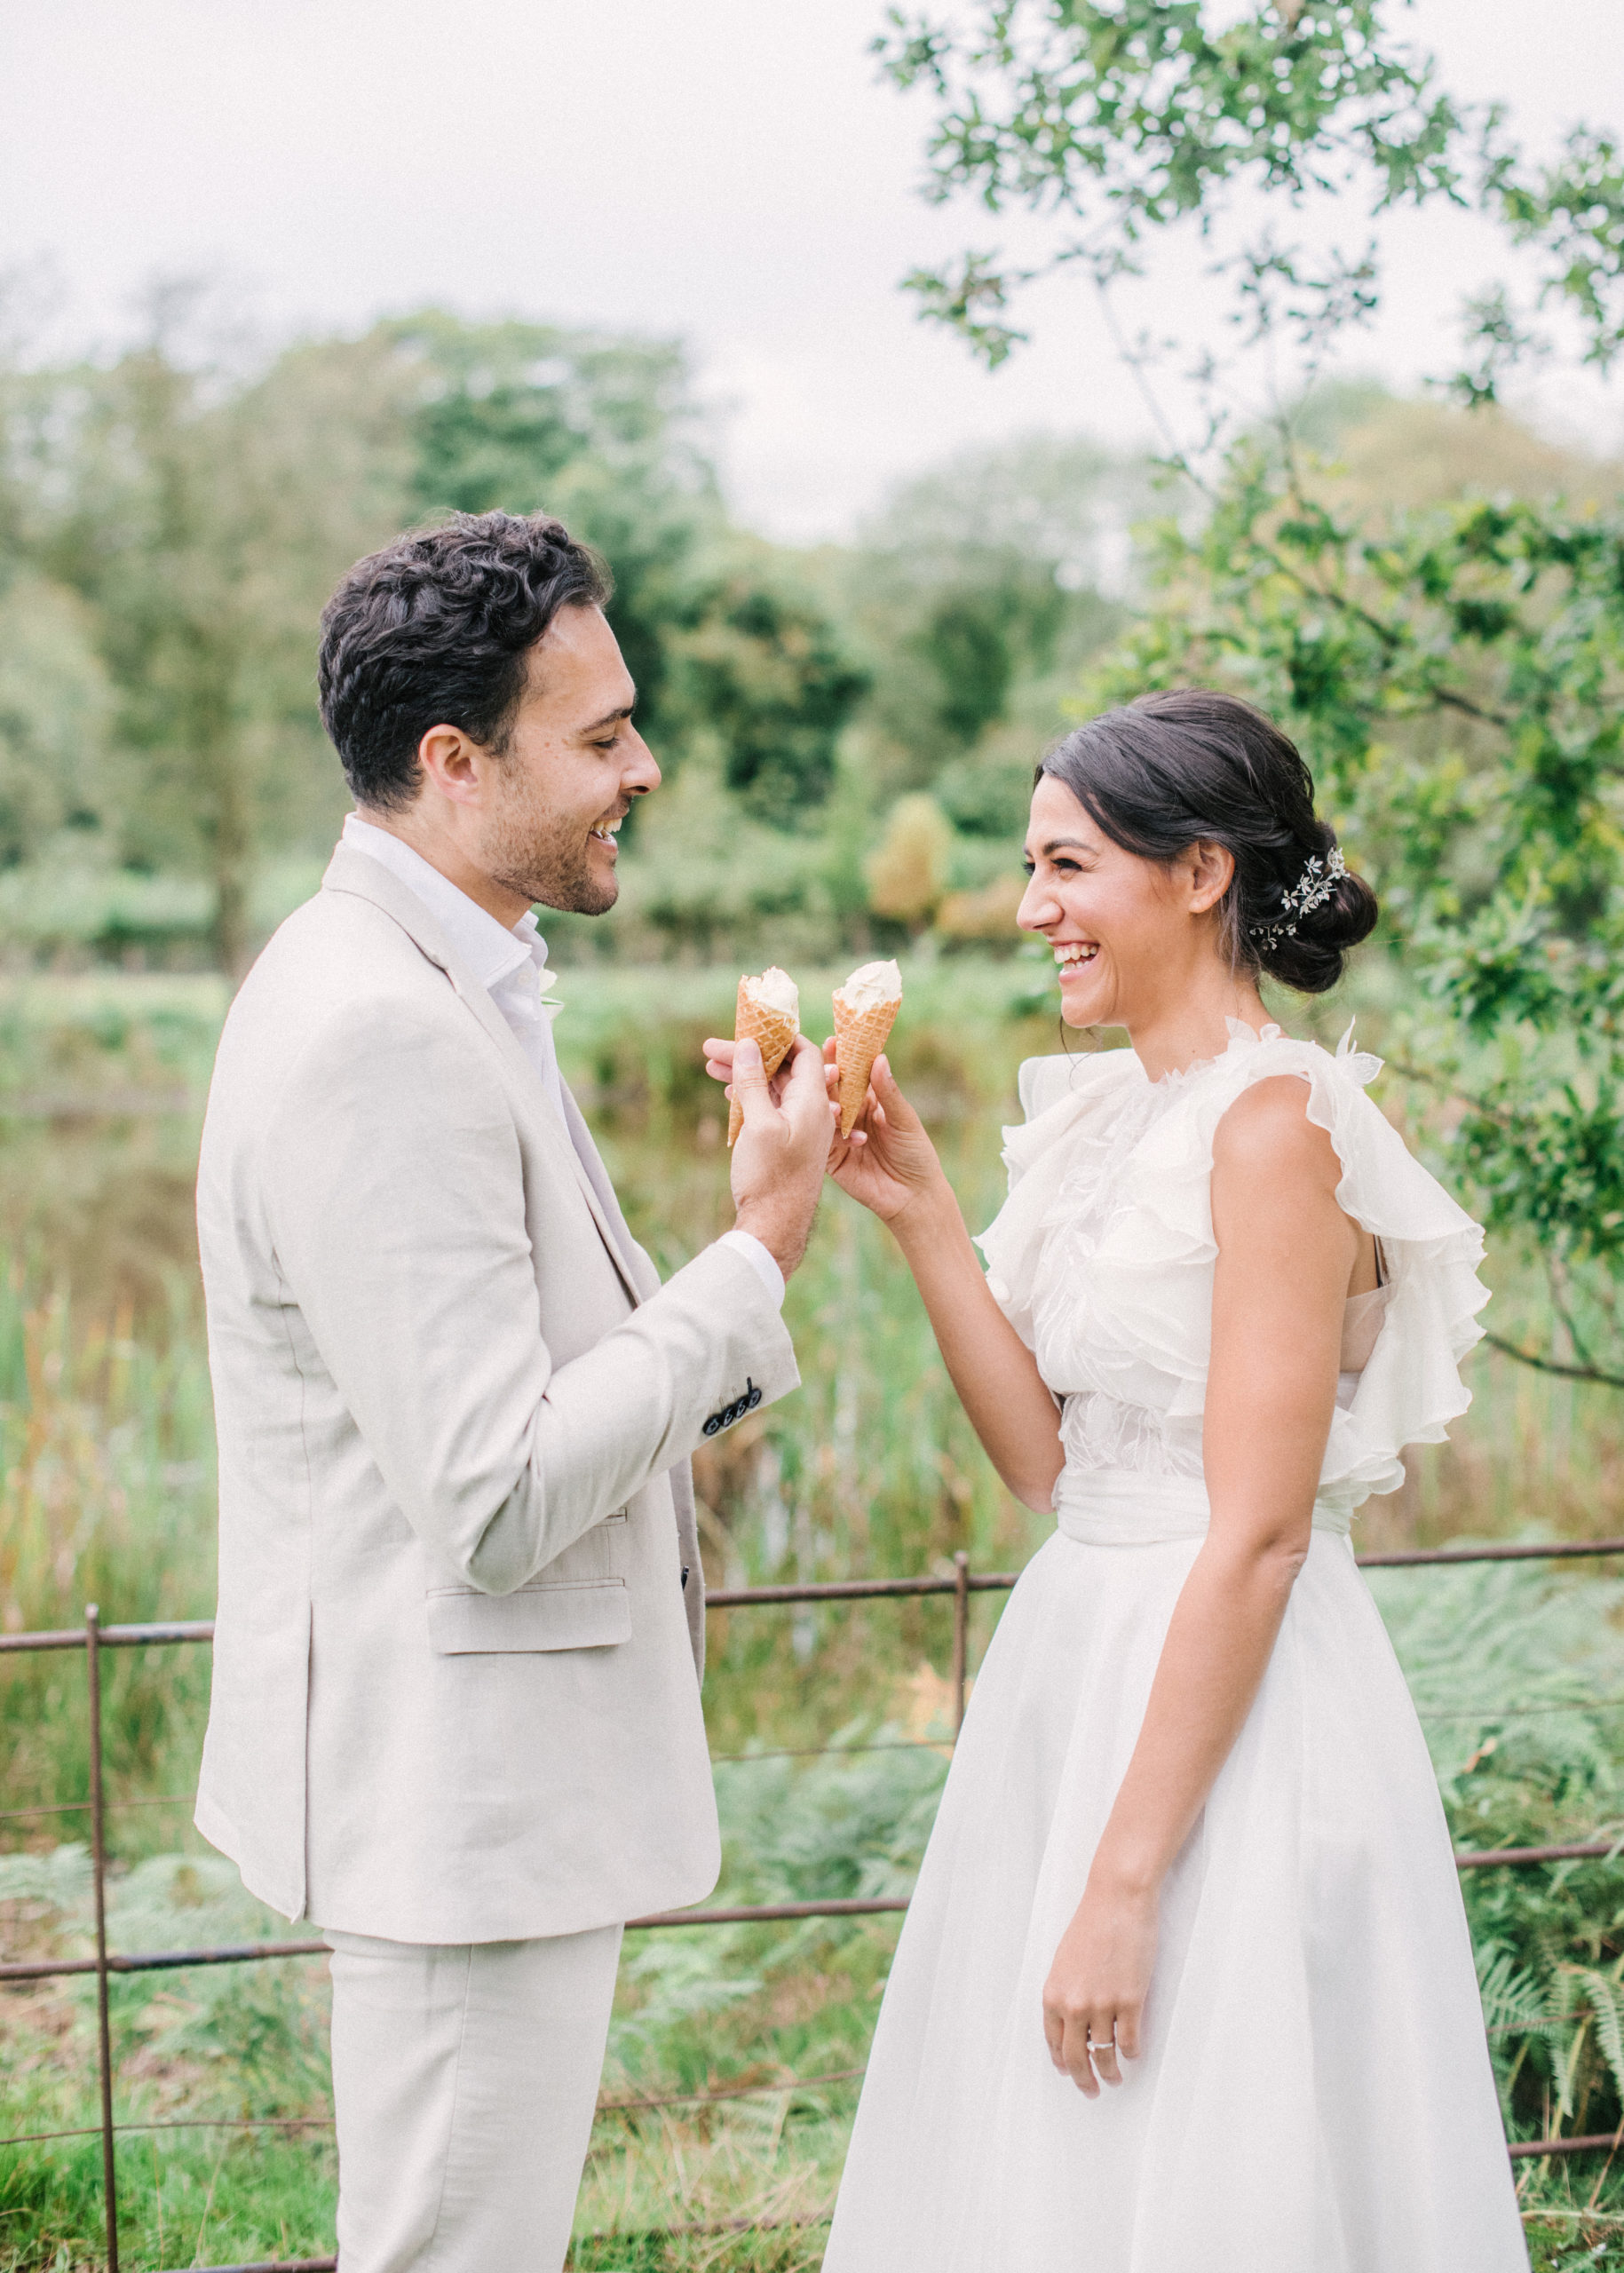 Bridal-couple-enjoying-gelato-on-a hot-day-in-Italy-at-wedding